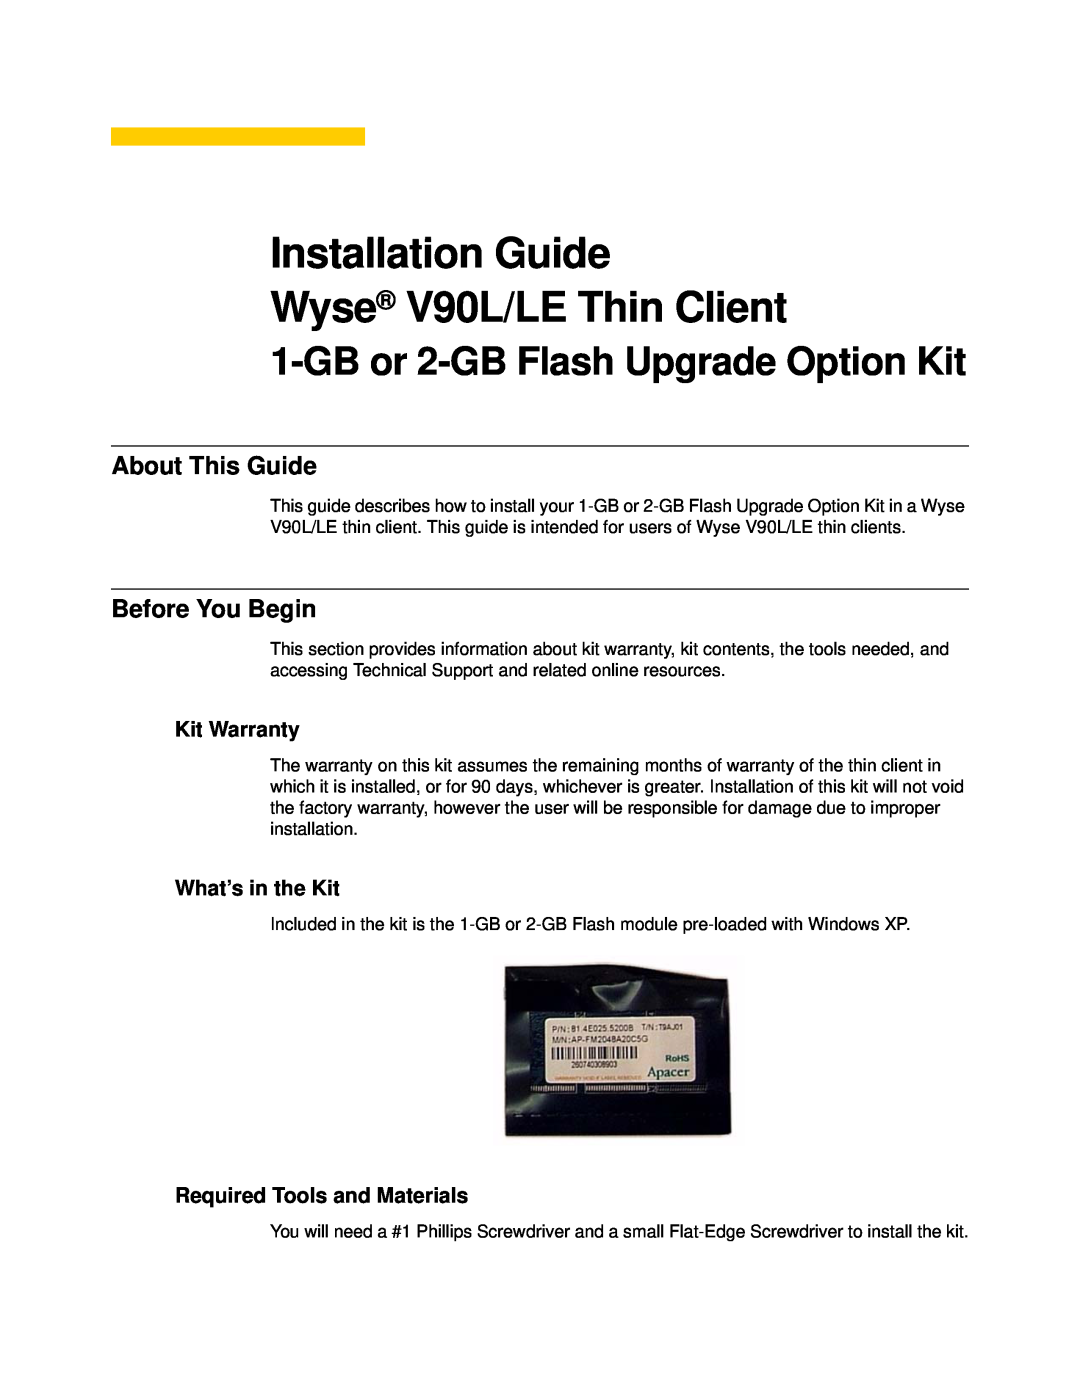 Wyse Technology manual Installation Guide Wyse V90L/LE Thin Client, About This Guide, Before You Begin, Kit Warranty 